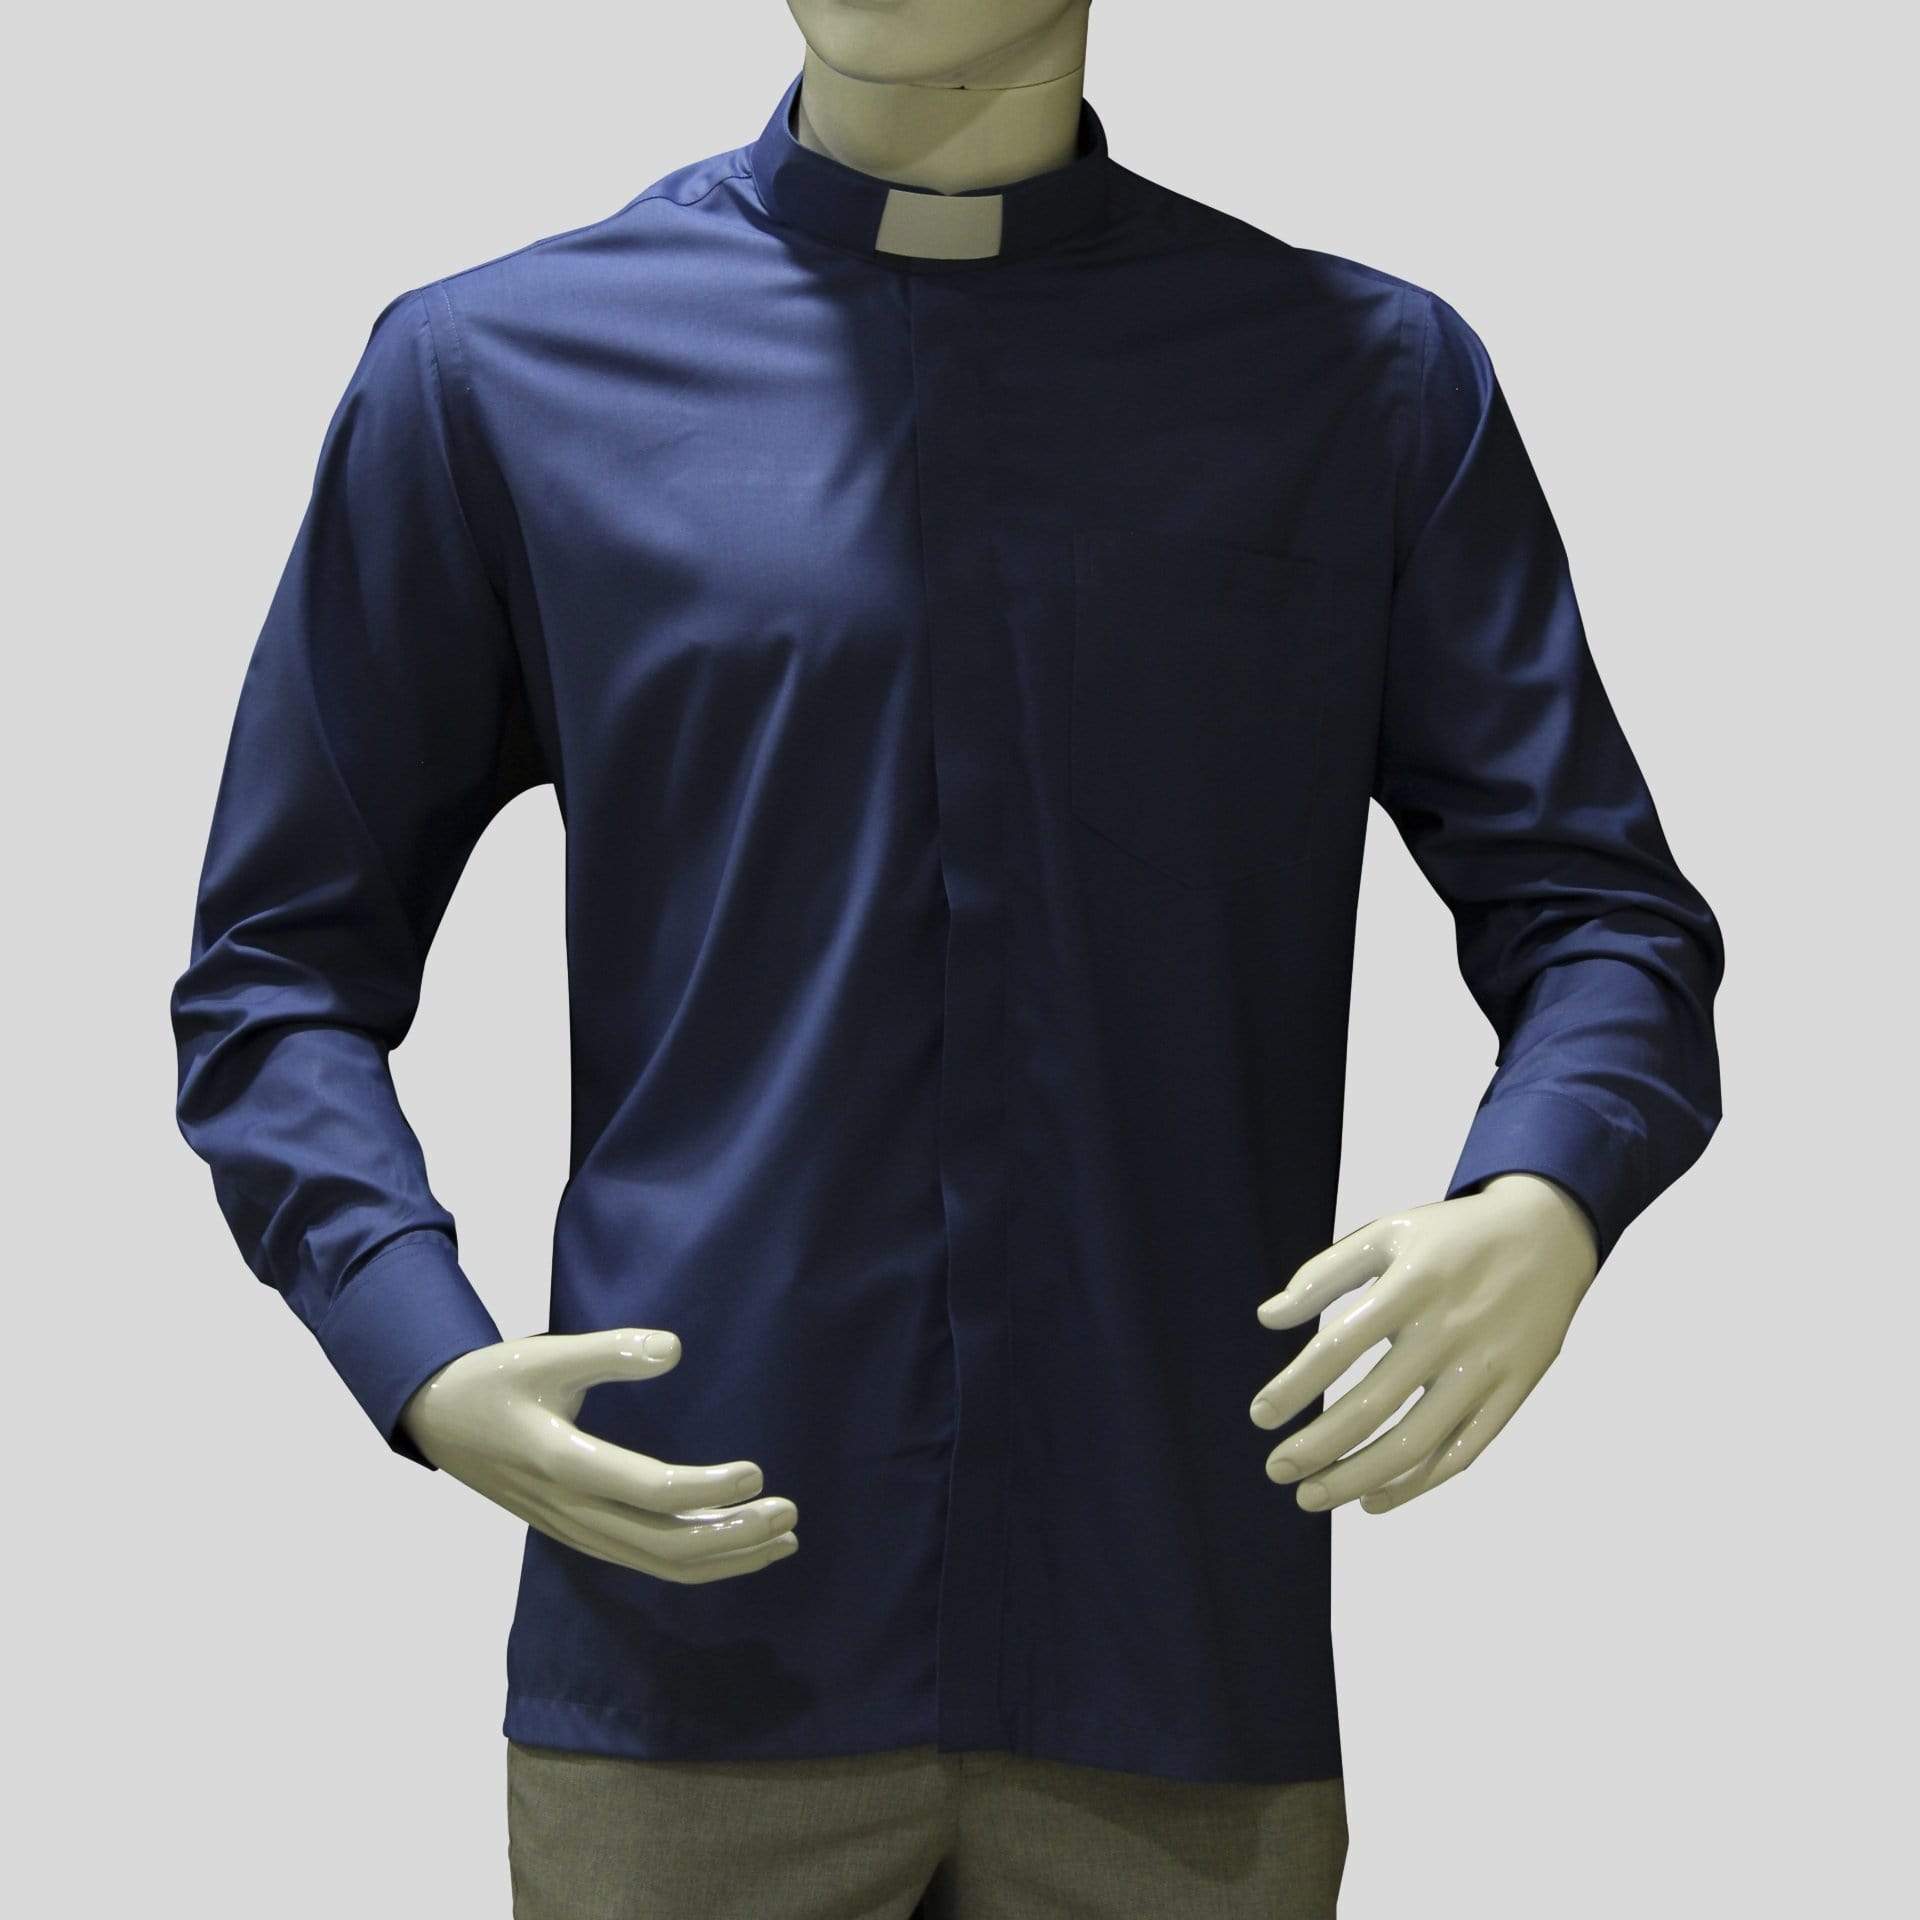 Living Words 36 / Normal / Dark Blue Clergy Shirts